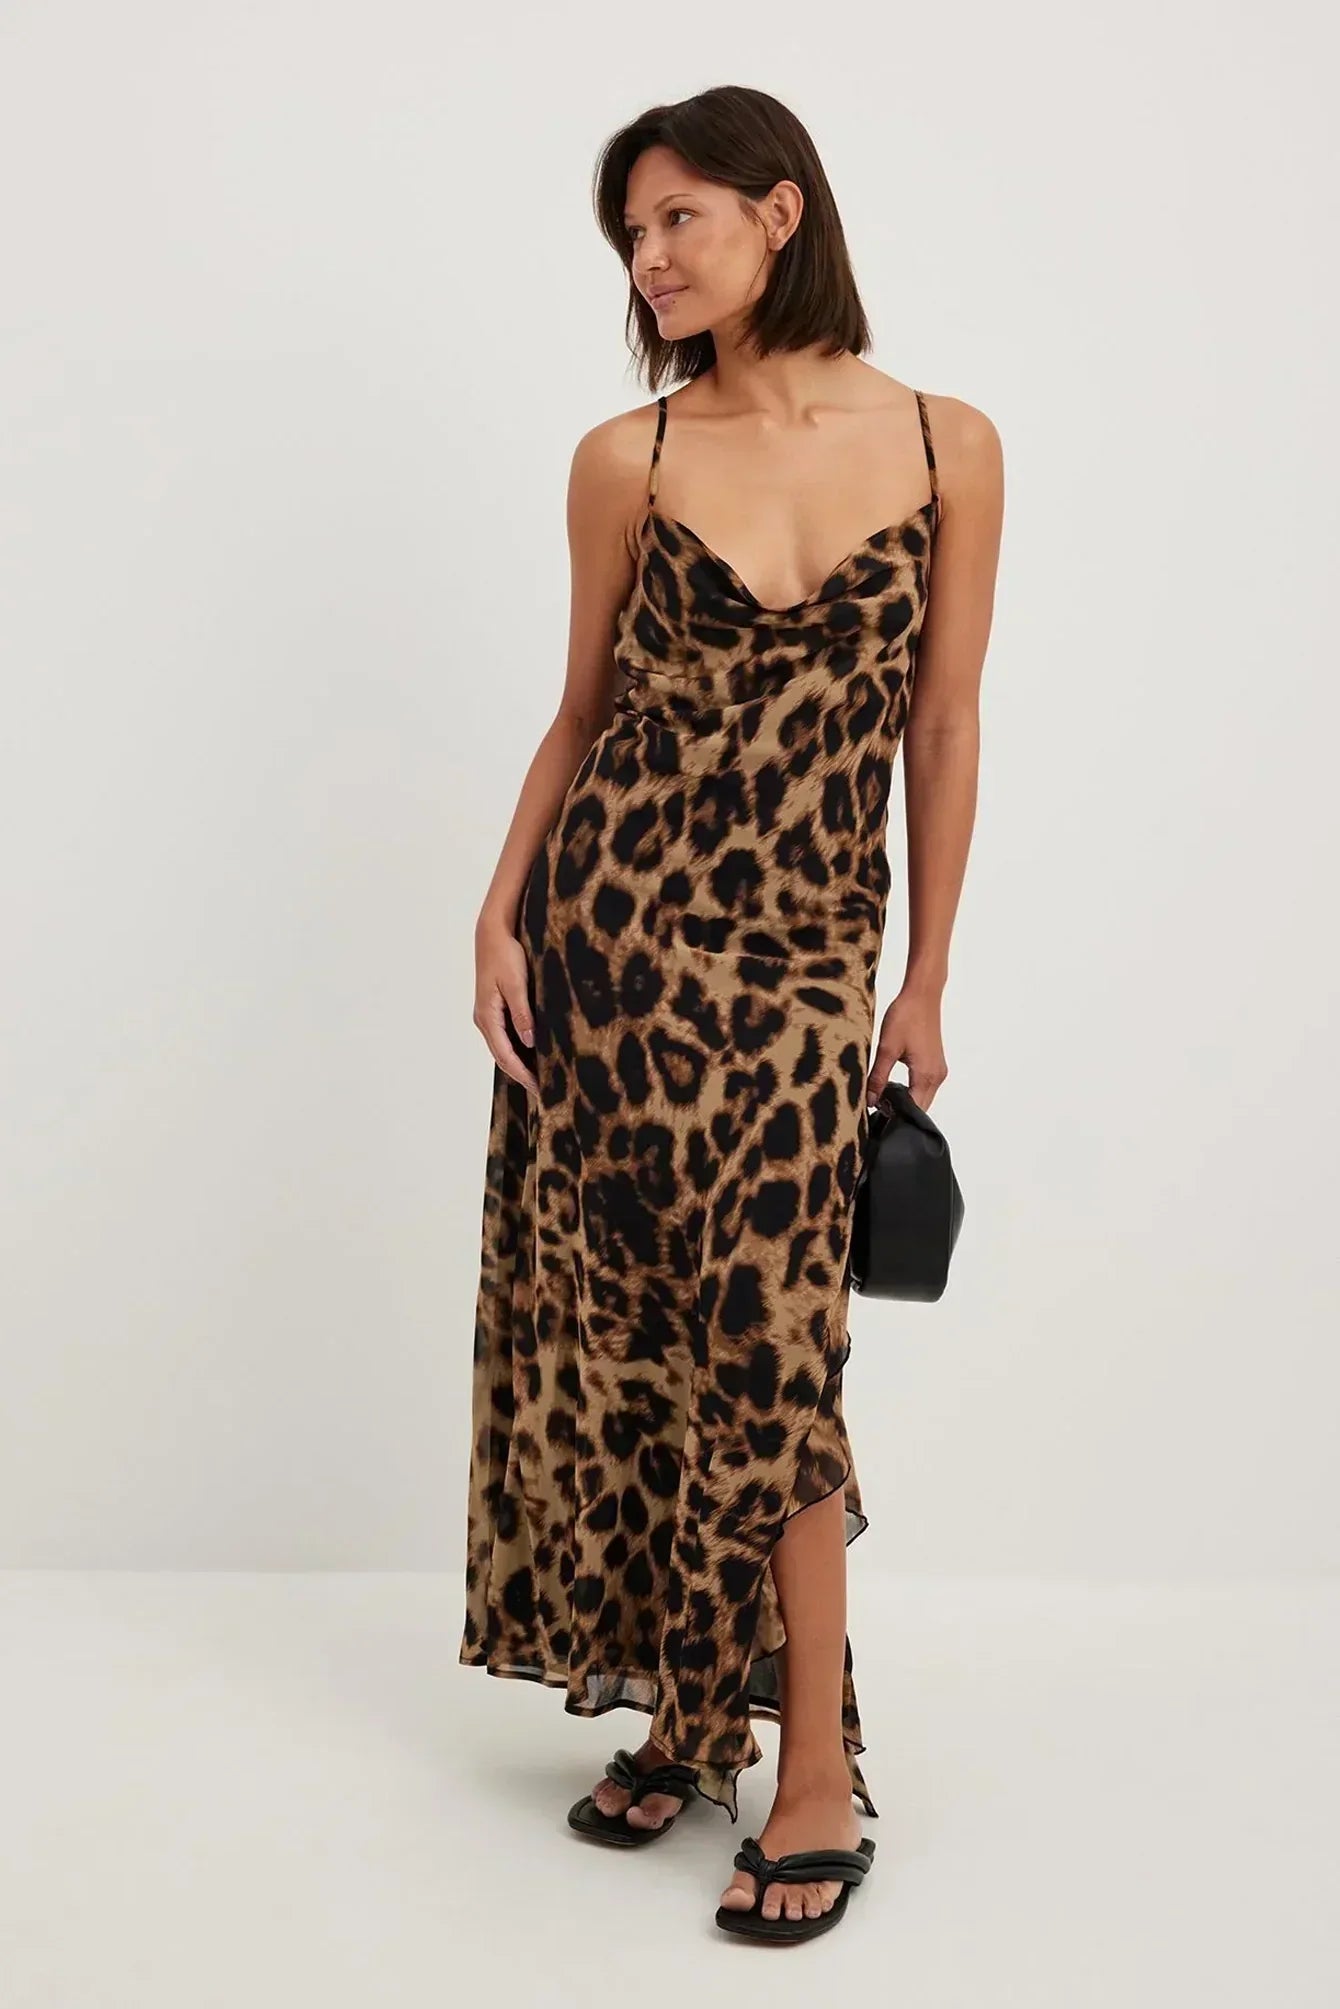 THE CHIFFON FRILL DETAIL MAXI DRESS - FAUX LEO - EXCLUSIVE Dresses from NA-KD - Just €60! SHOP NOW AT IAMINHATELOVE BOTH IN STORE FOR CYPRUS AND ONLINE WORLDWIDE @ IAMINHATELOVE.COM